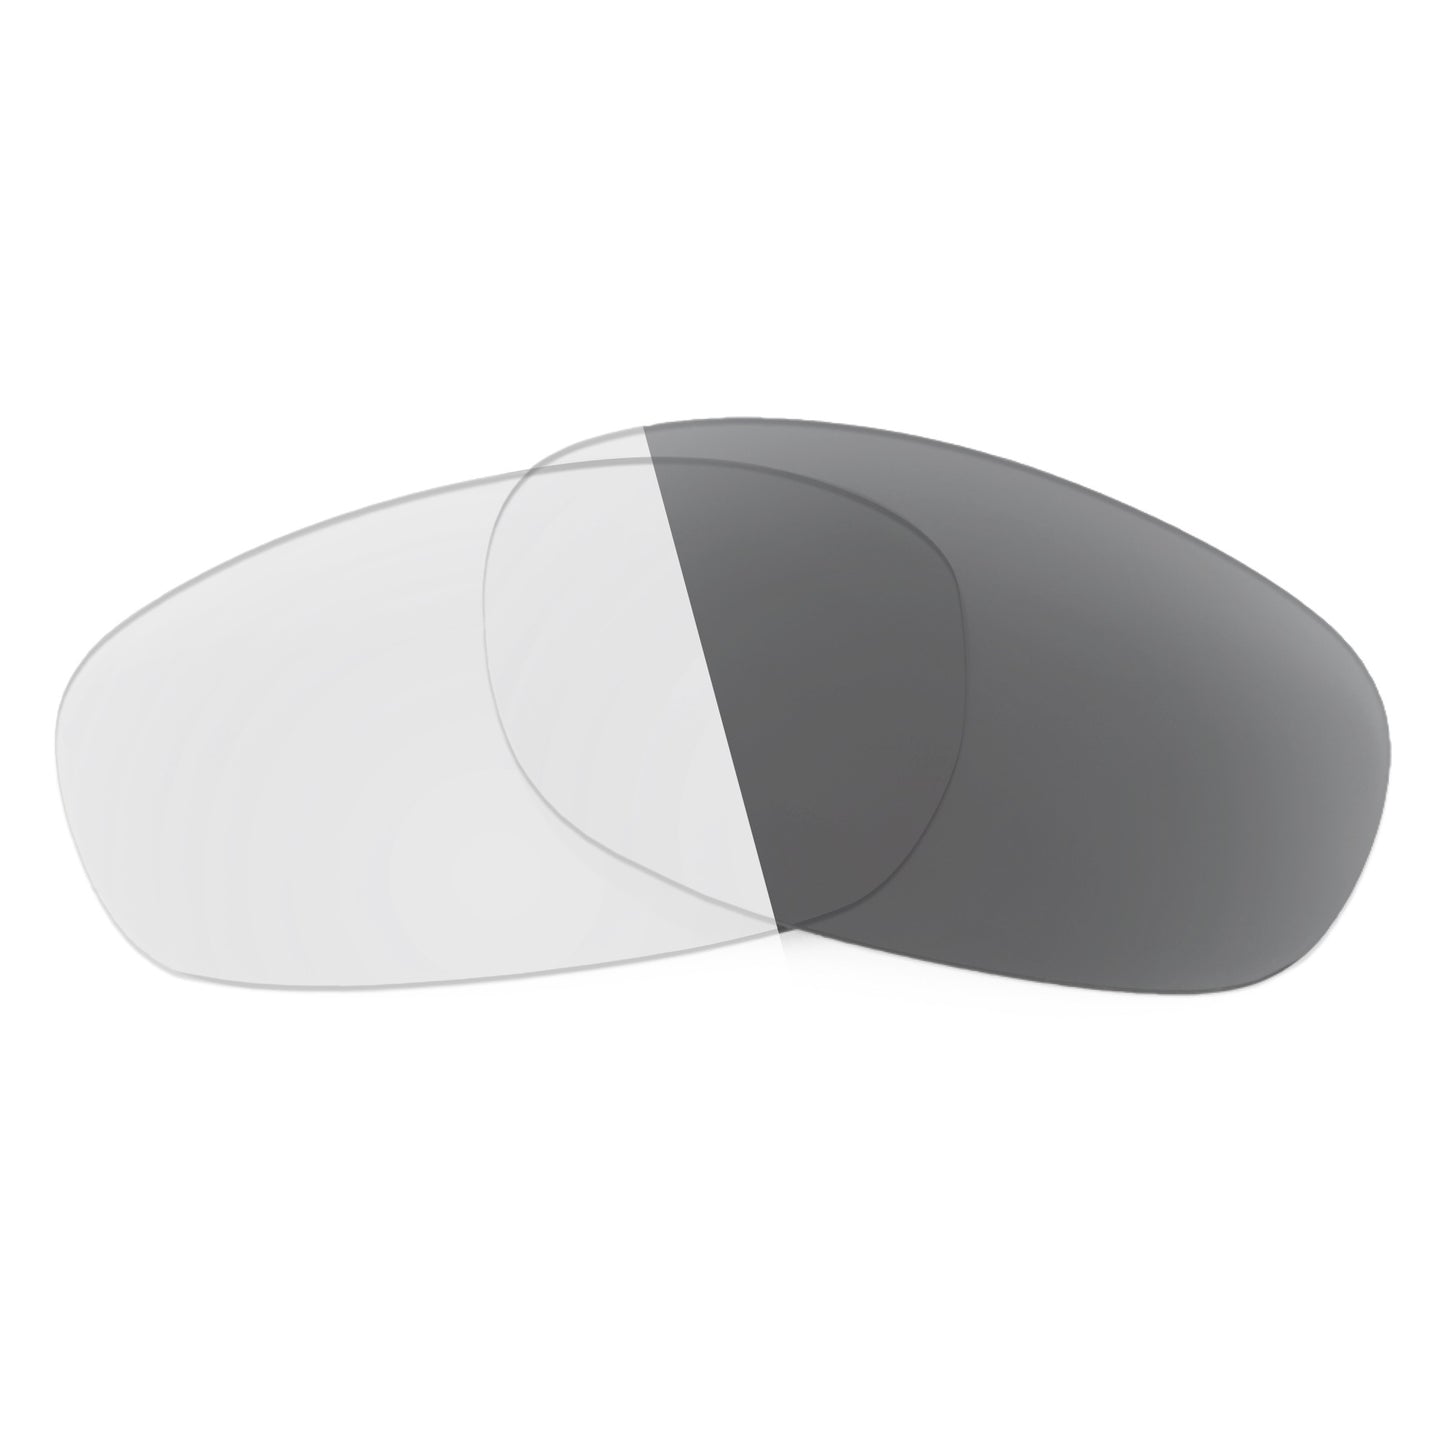 Revant replacement lenses for Ray-Ban RB3132 56mm Non-Polarized Adapt Gray Photochromic